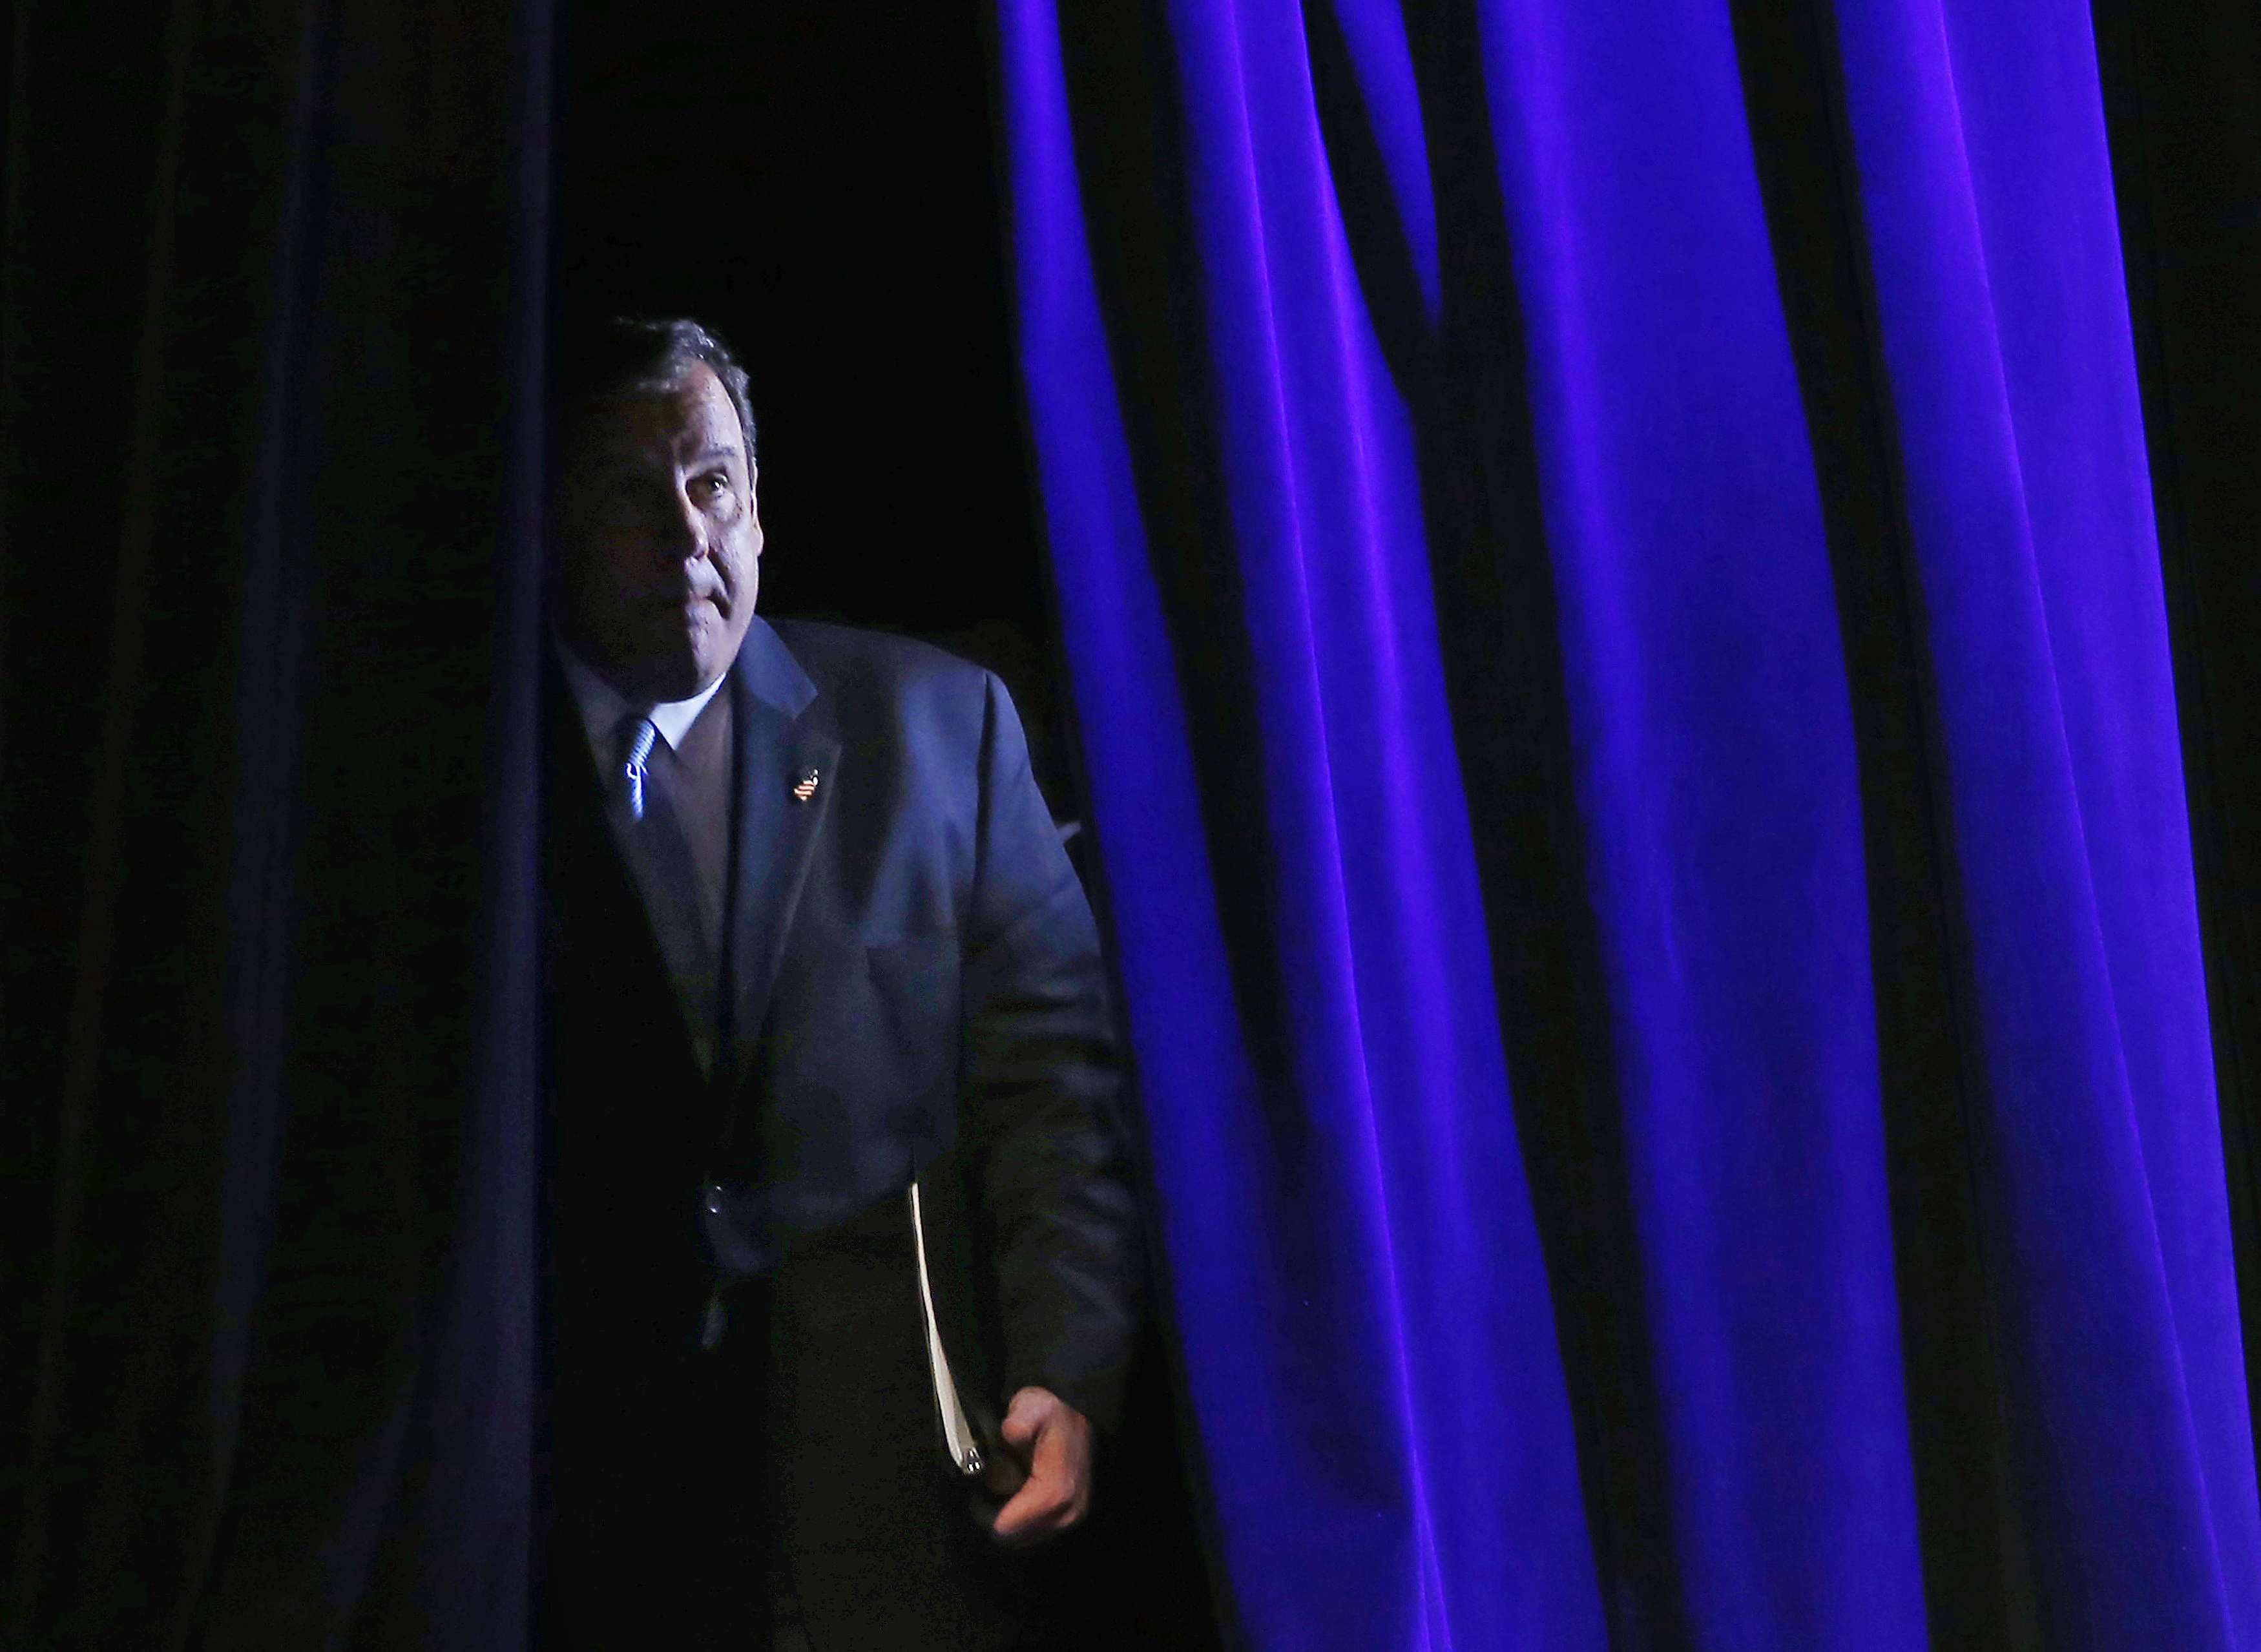 Governor of New Jersey Chris Christie arrives to speak at the Freedom Summit in Des Moines, Iowa on Jan. 24, 2015. (Jim Youg—Reuters)